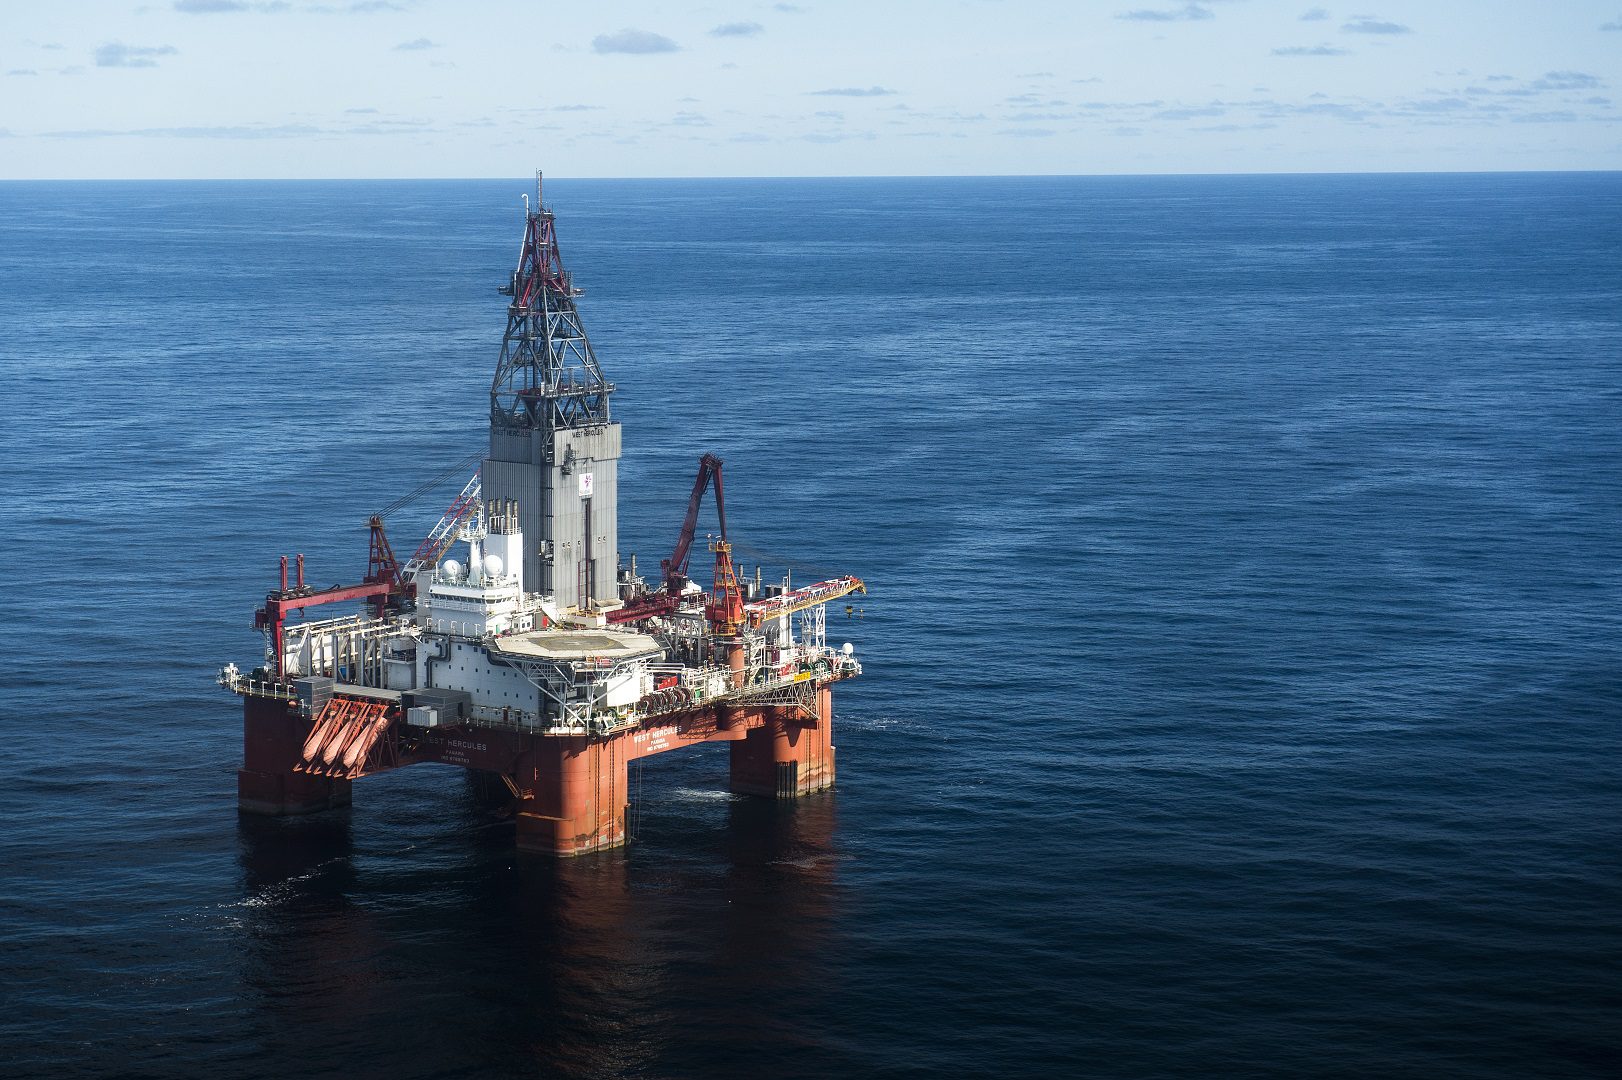 West Hercules drilling well number 100 at the Nunatak prospect in the Barents Sea.